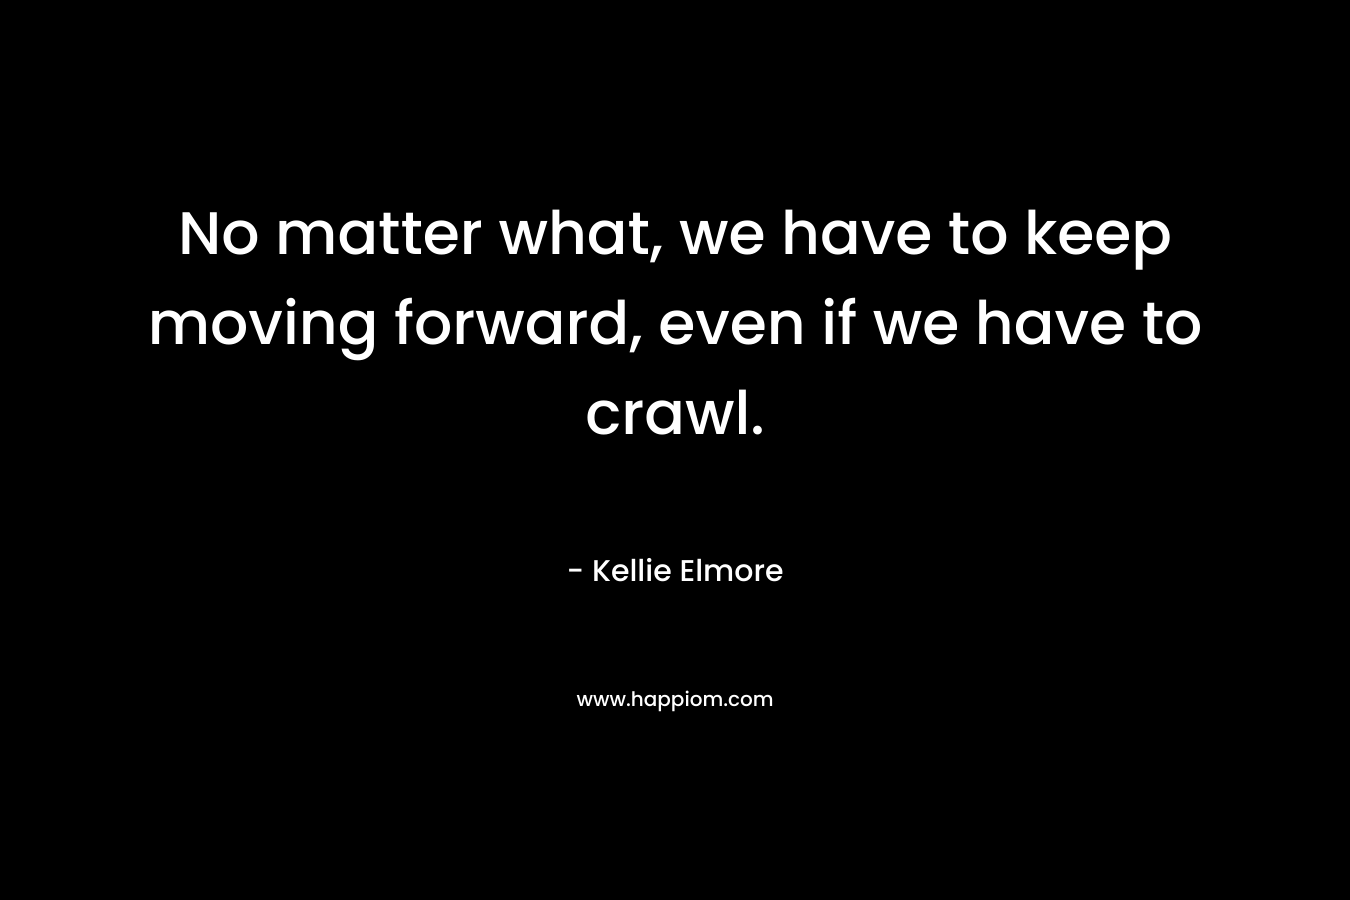 No matter what, we have to keep moving forward, even if we have to crawl. – Kellie Elmore